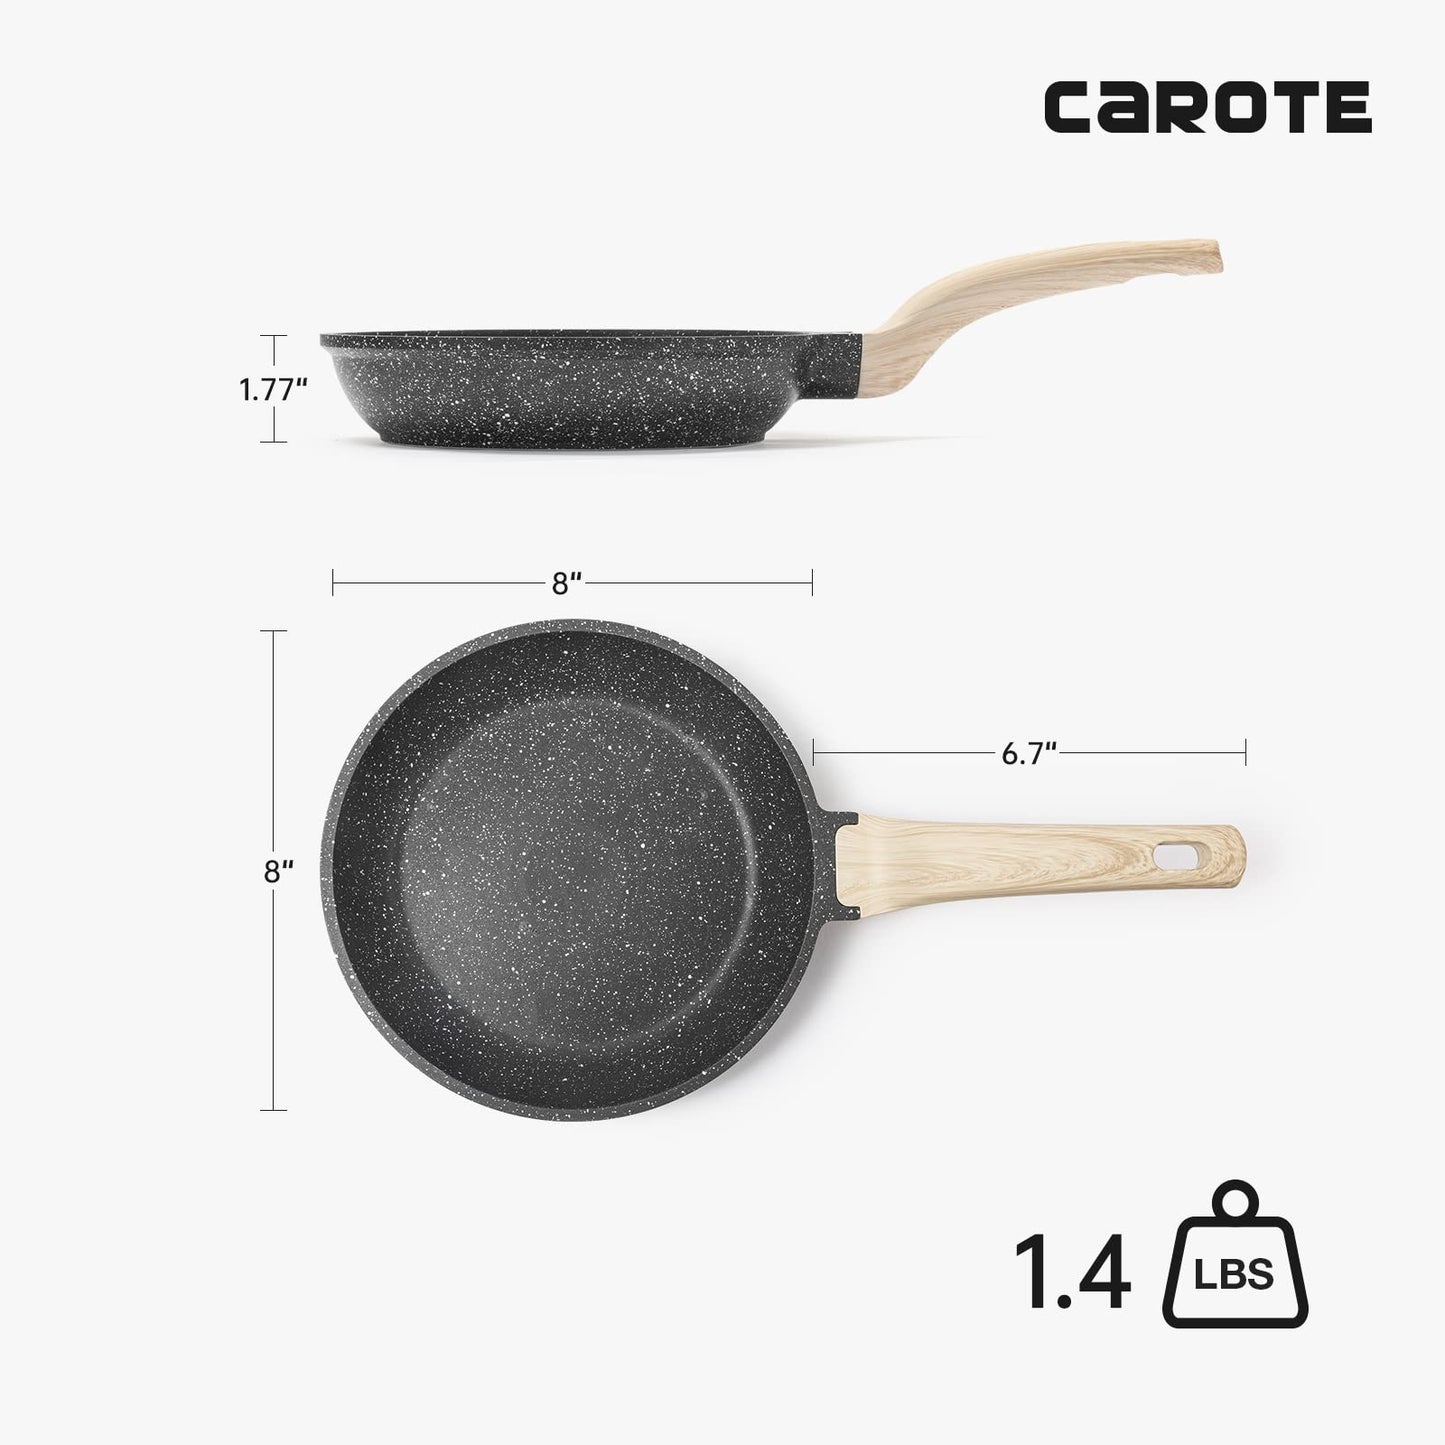 CAROTE Nonstick Frying Pan Skillet,8" Non Stick Granite Fry Pan with Glass Lid, Egg Pan Omelet Pans, Stone Cookware Chef's Pan, PFOA Free (Classic Granite, 8-Inch)